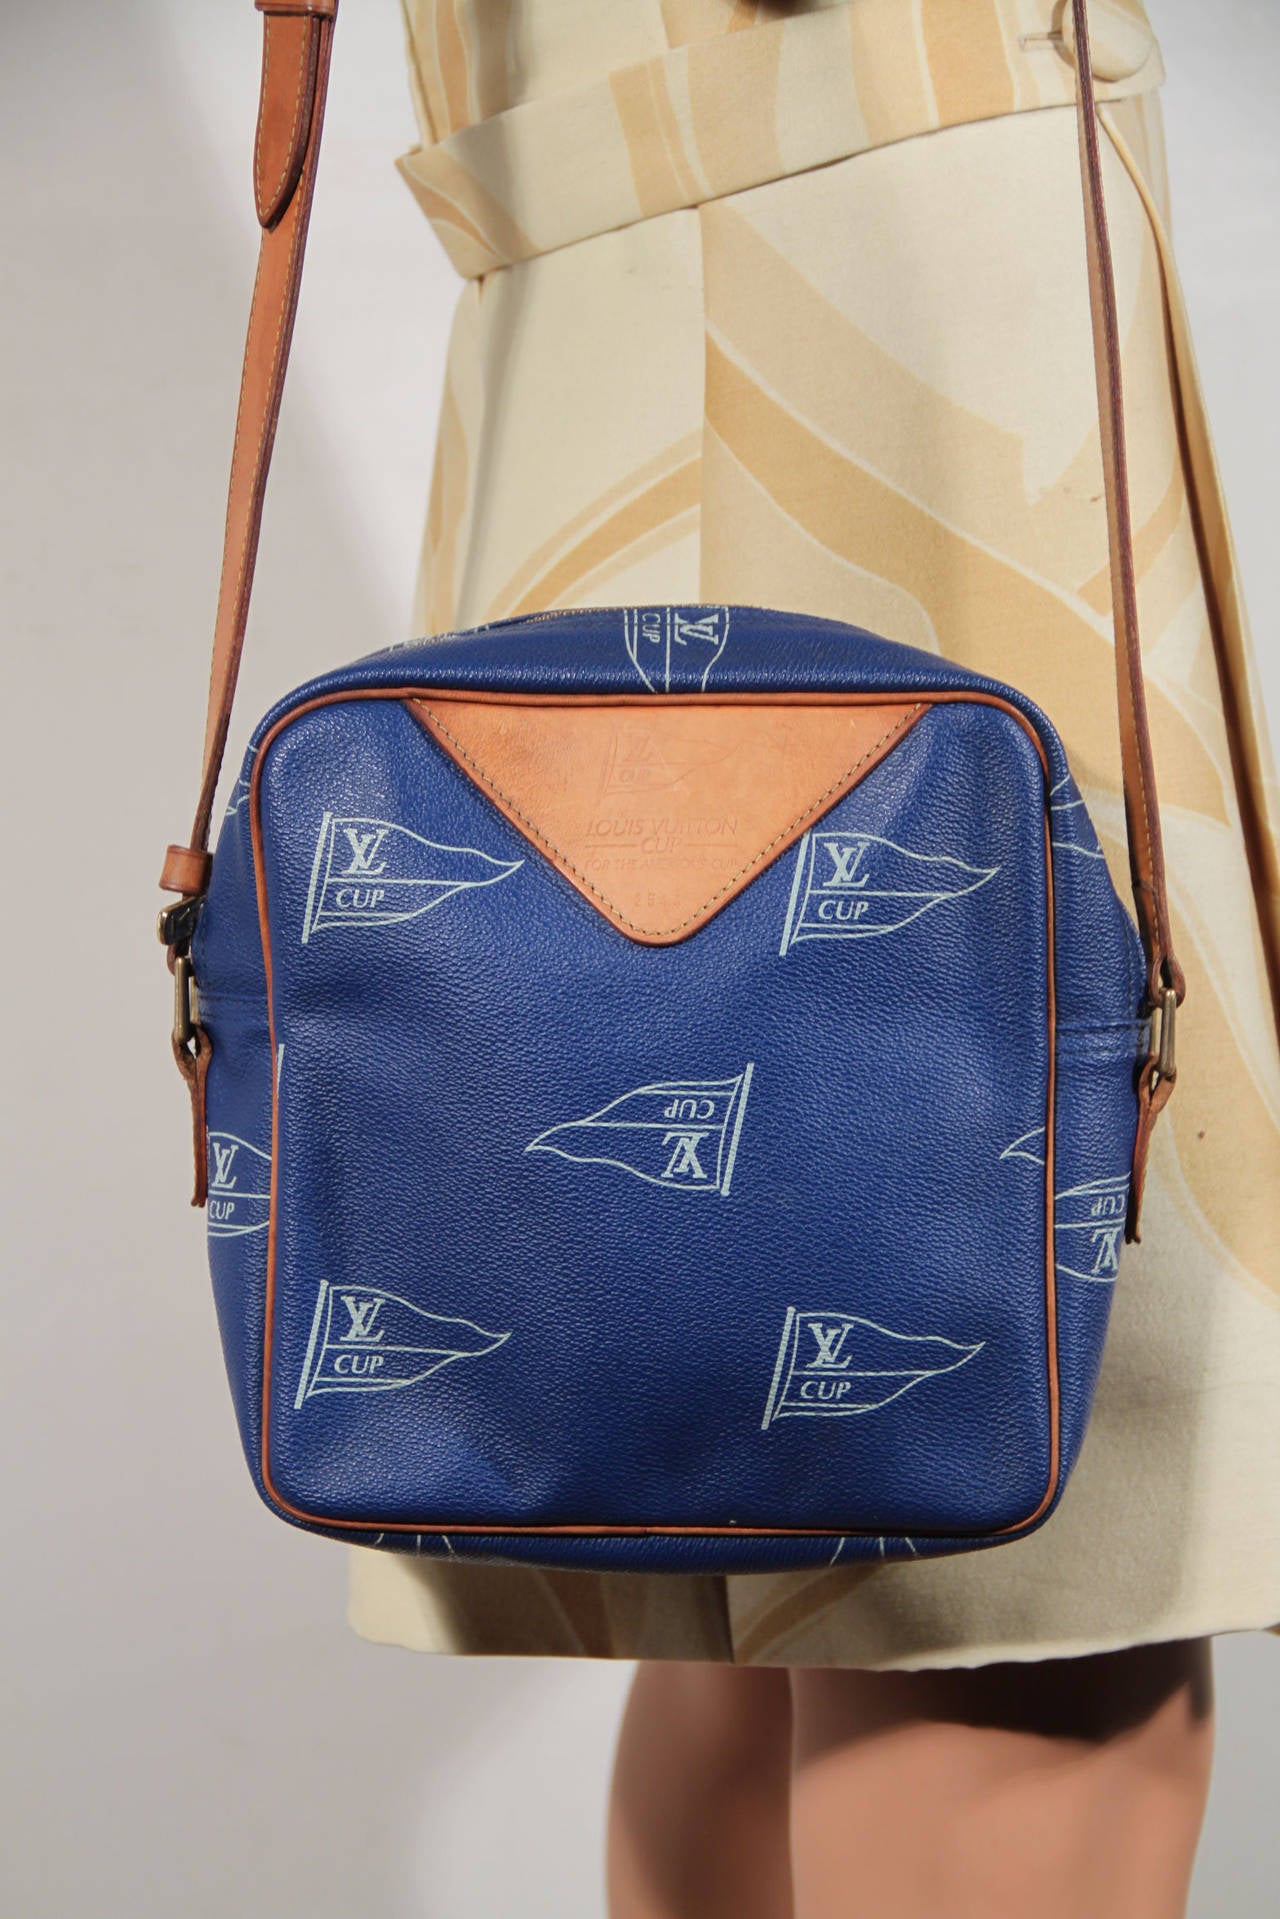 LOUIS VUITTON AMERICA CUP 1992 Blue Canvas MESSENGER BAG Limited Edition at 1stdibs